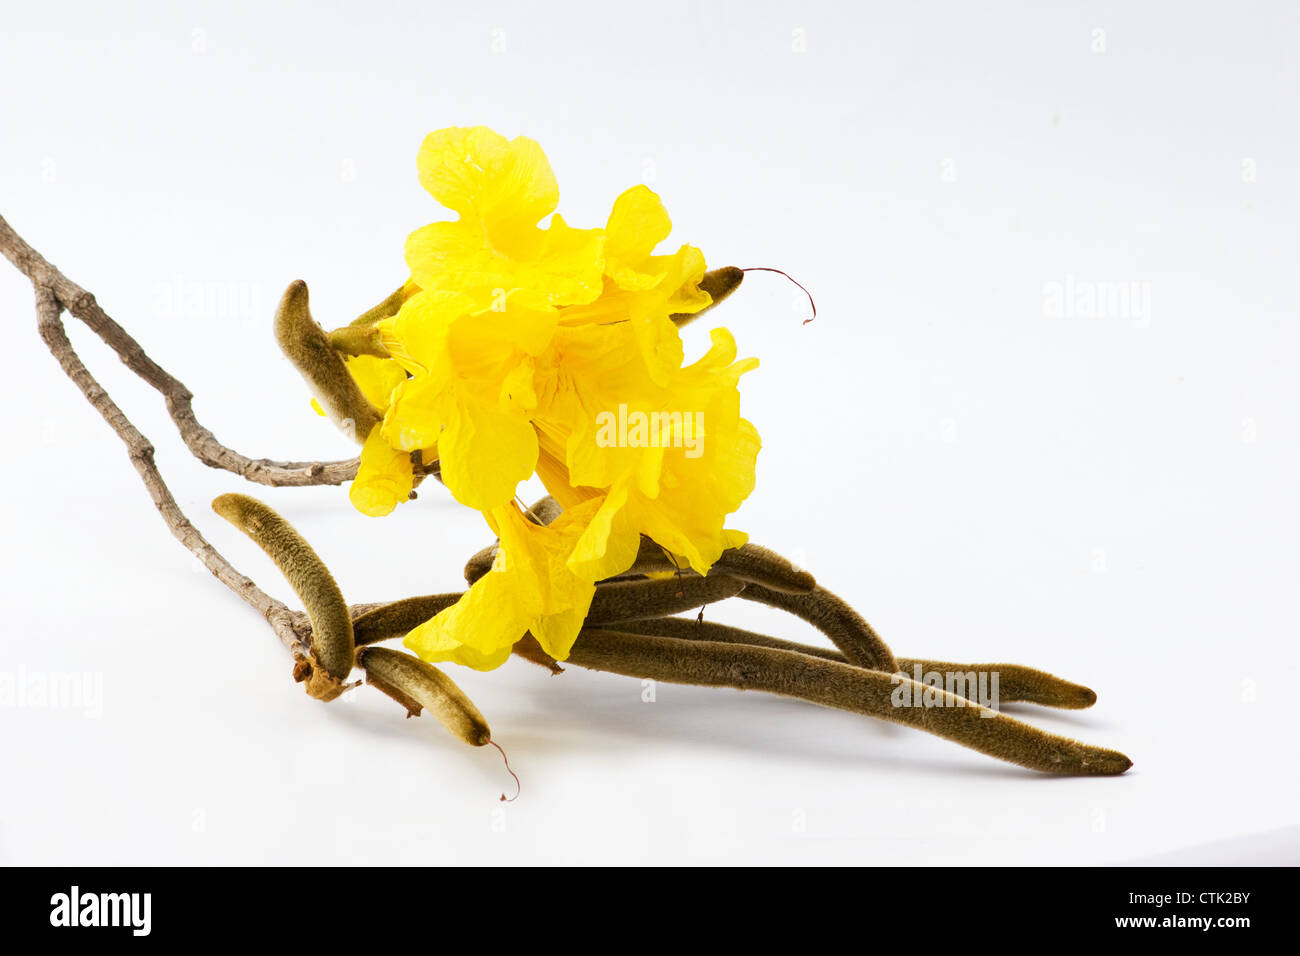 (Tabebuia chrysotricha) Golden trumpet tree blossoms and seed pods on white background Stock Photo